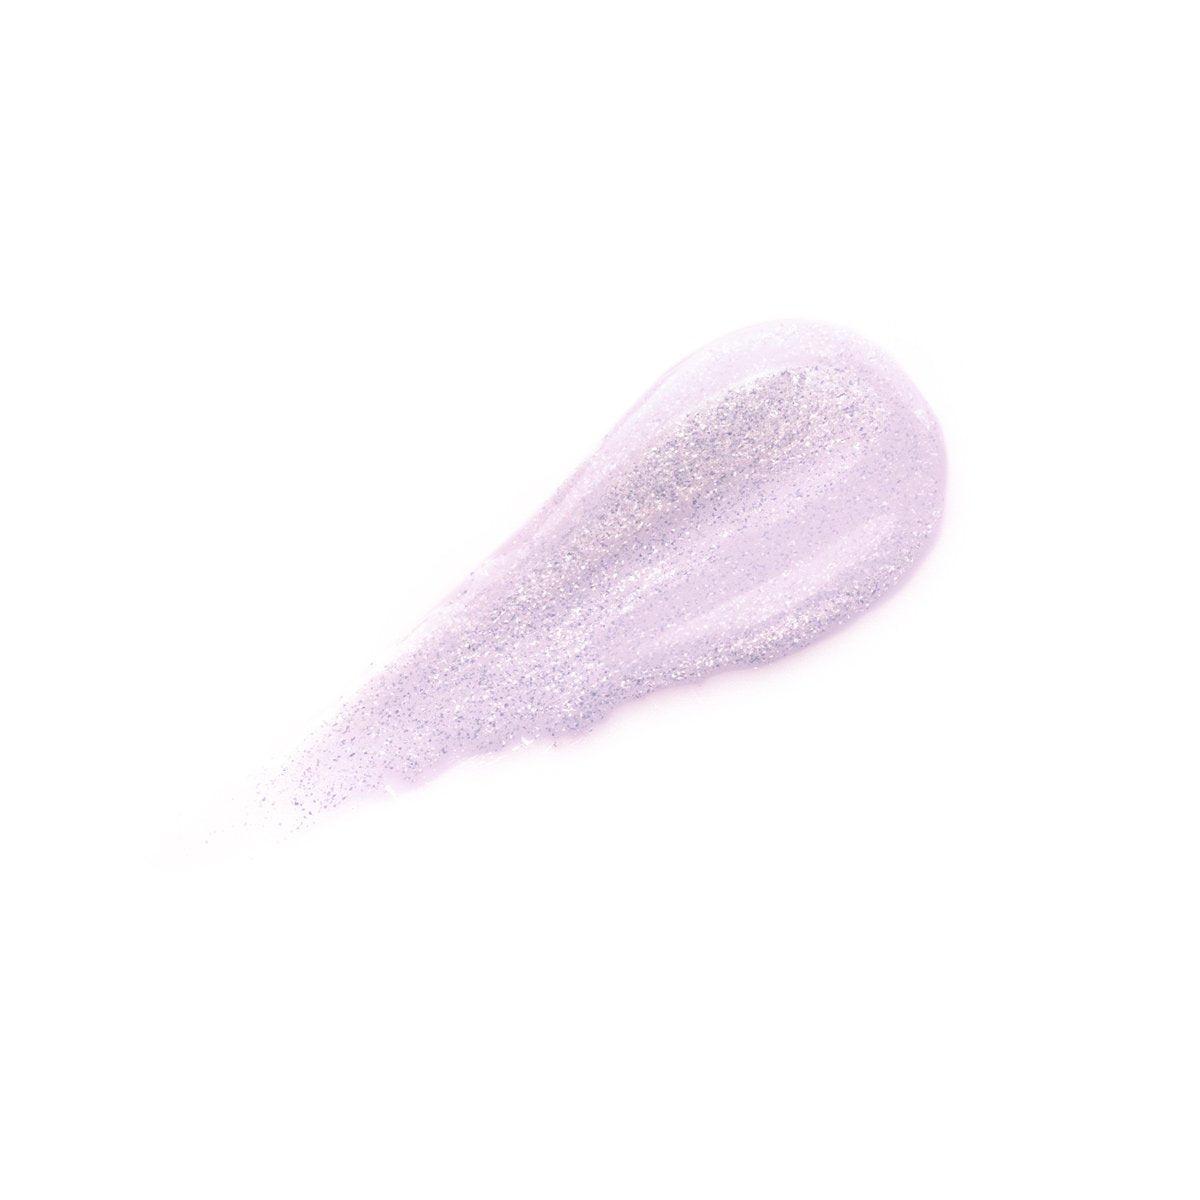 JE NE SAIS QUOI - IRIDESCENT COOL PINK WITH BLUE SHIMMER - shimmering pink lipgloss with glitter